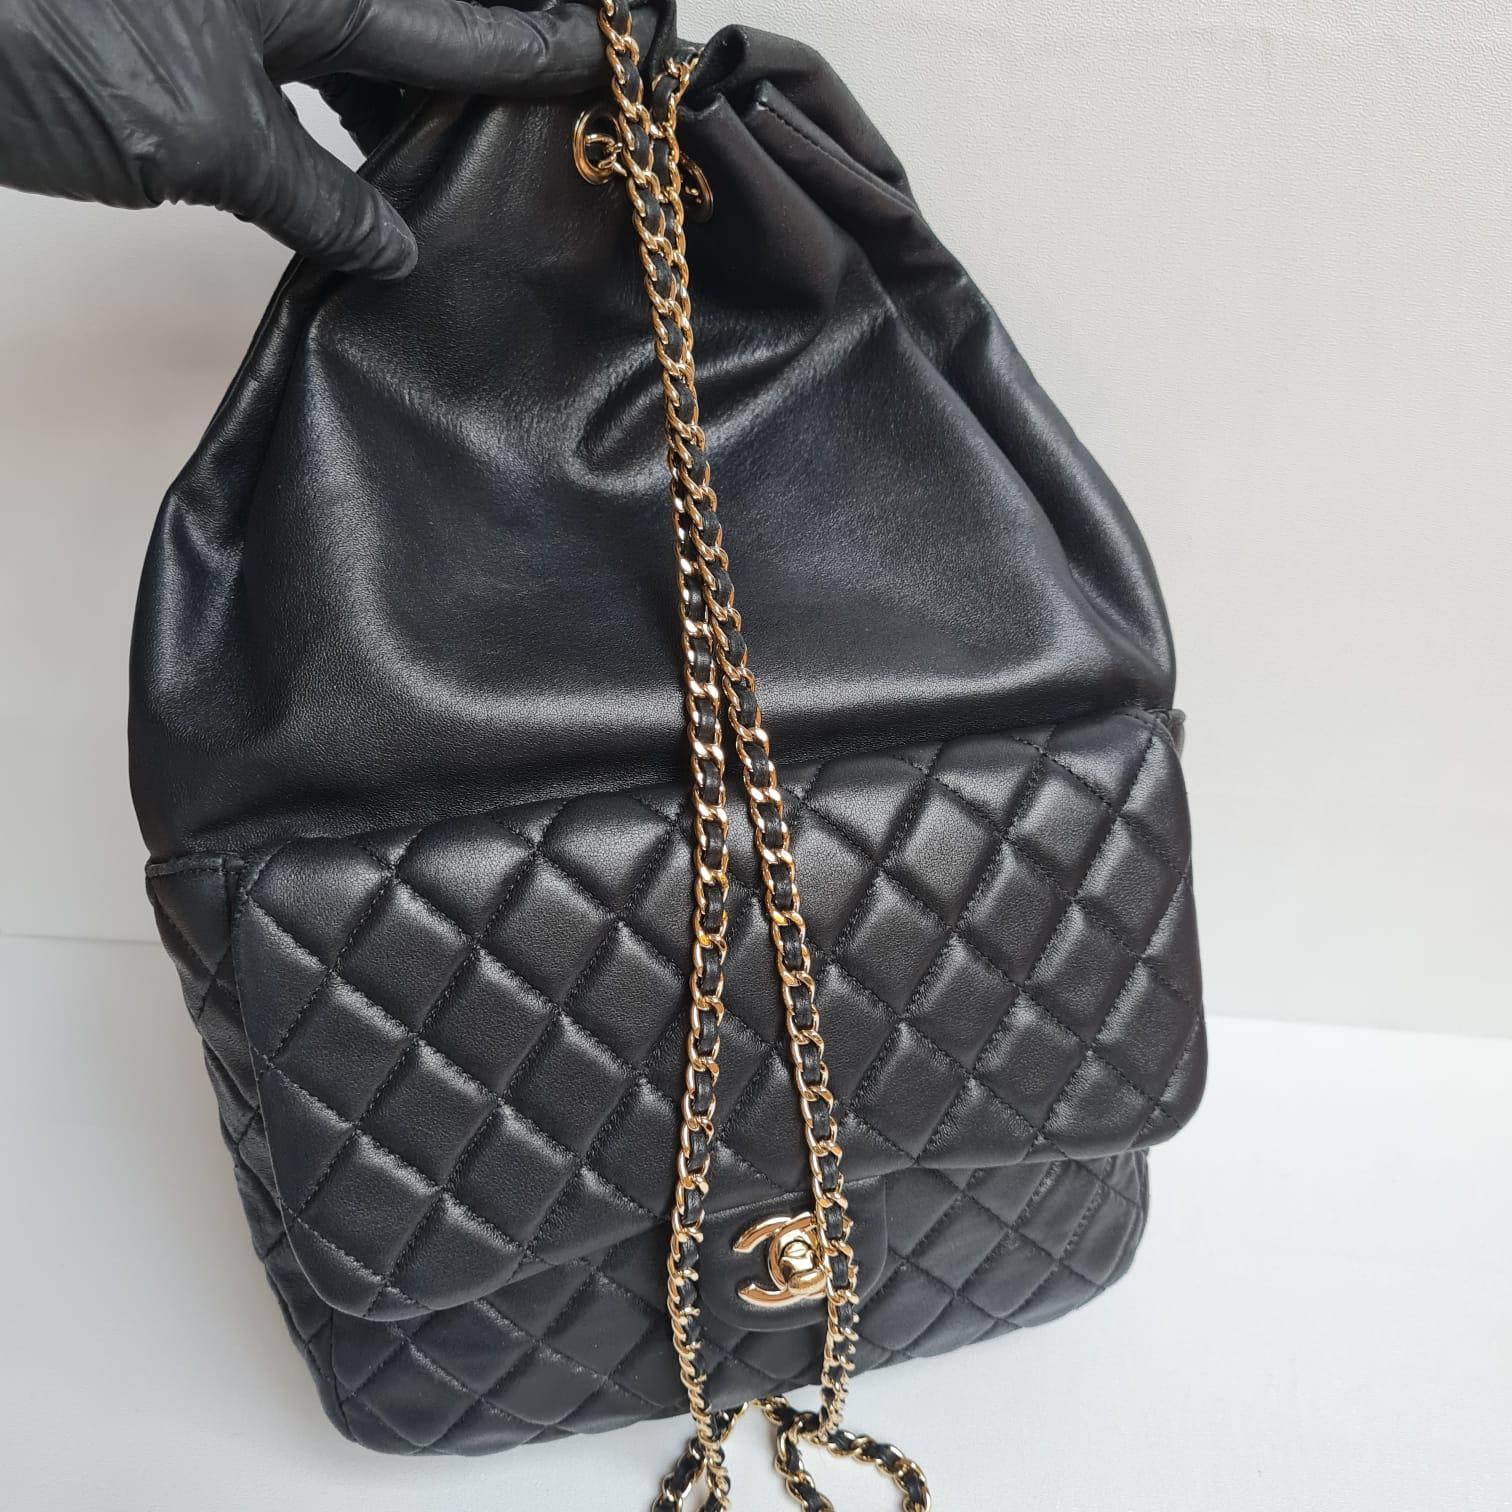 Beautiful supple drawstring Chanel bag, with classic quilted front pocket area. Light scratches on exterior surface. Minor scratches on hardware details. Marks and scratches on inner flap. Minor rubbing on trims and corners. Comes with dust bag